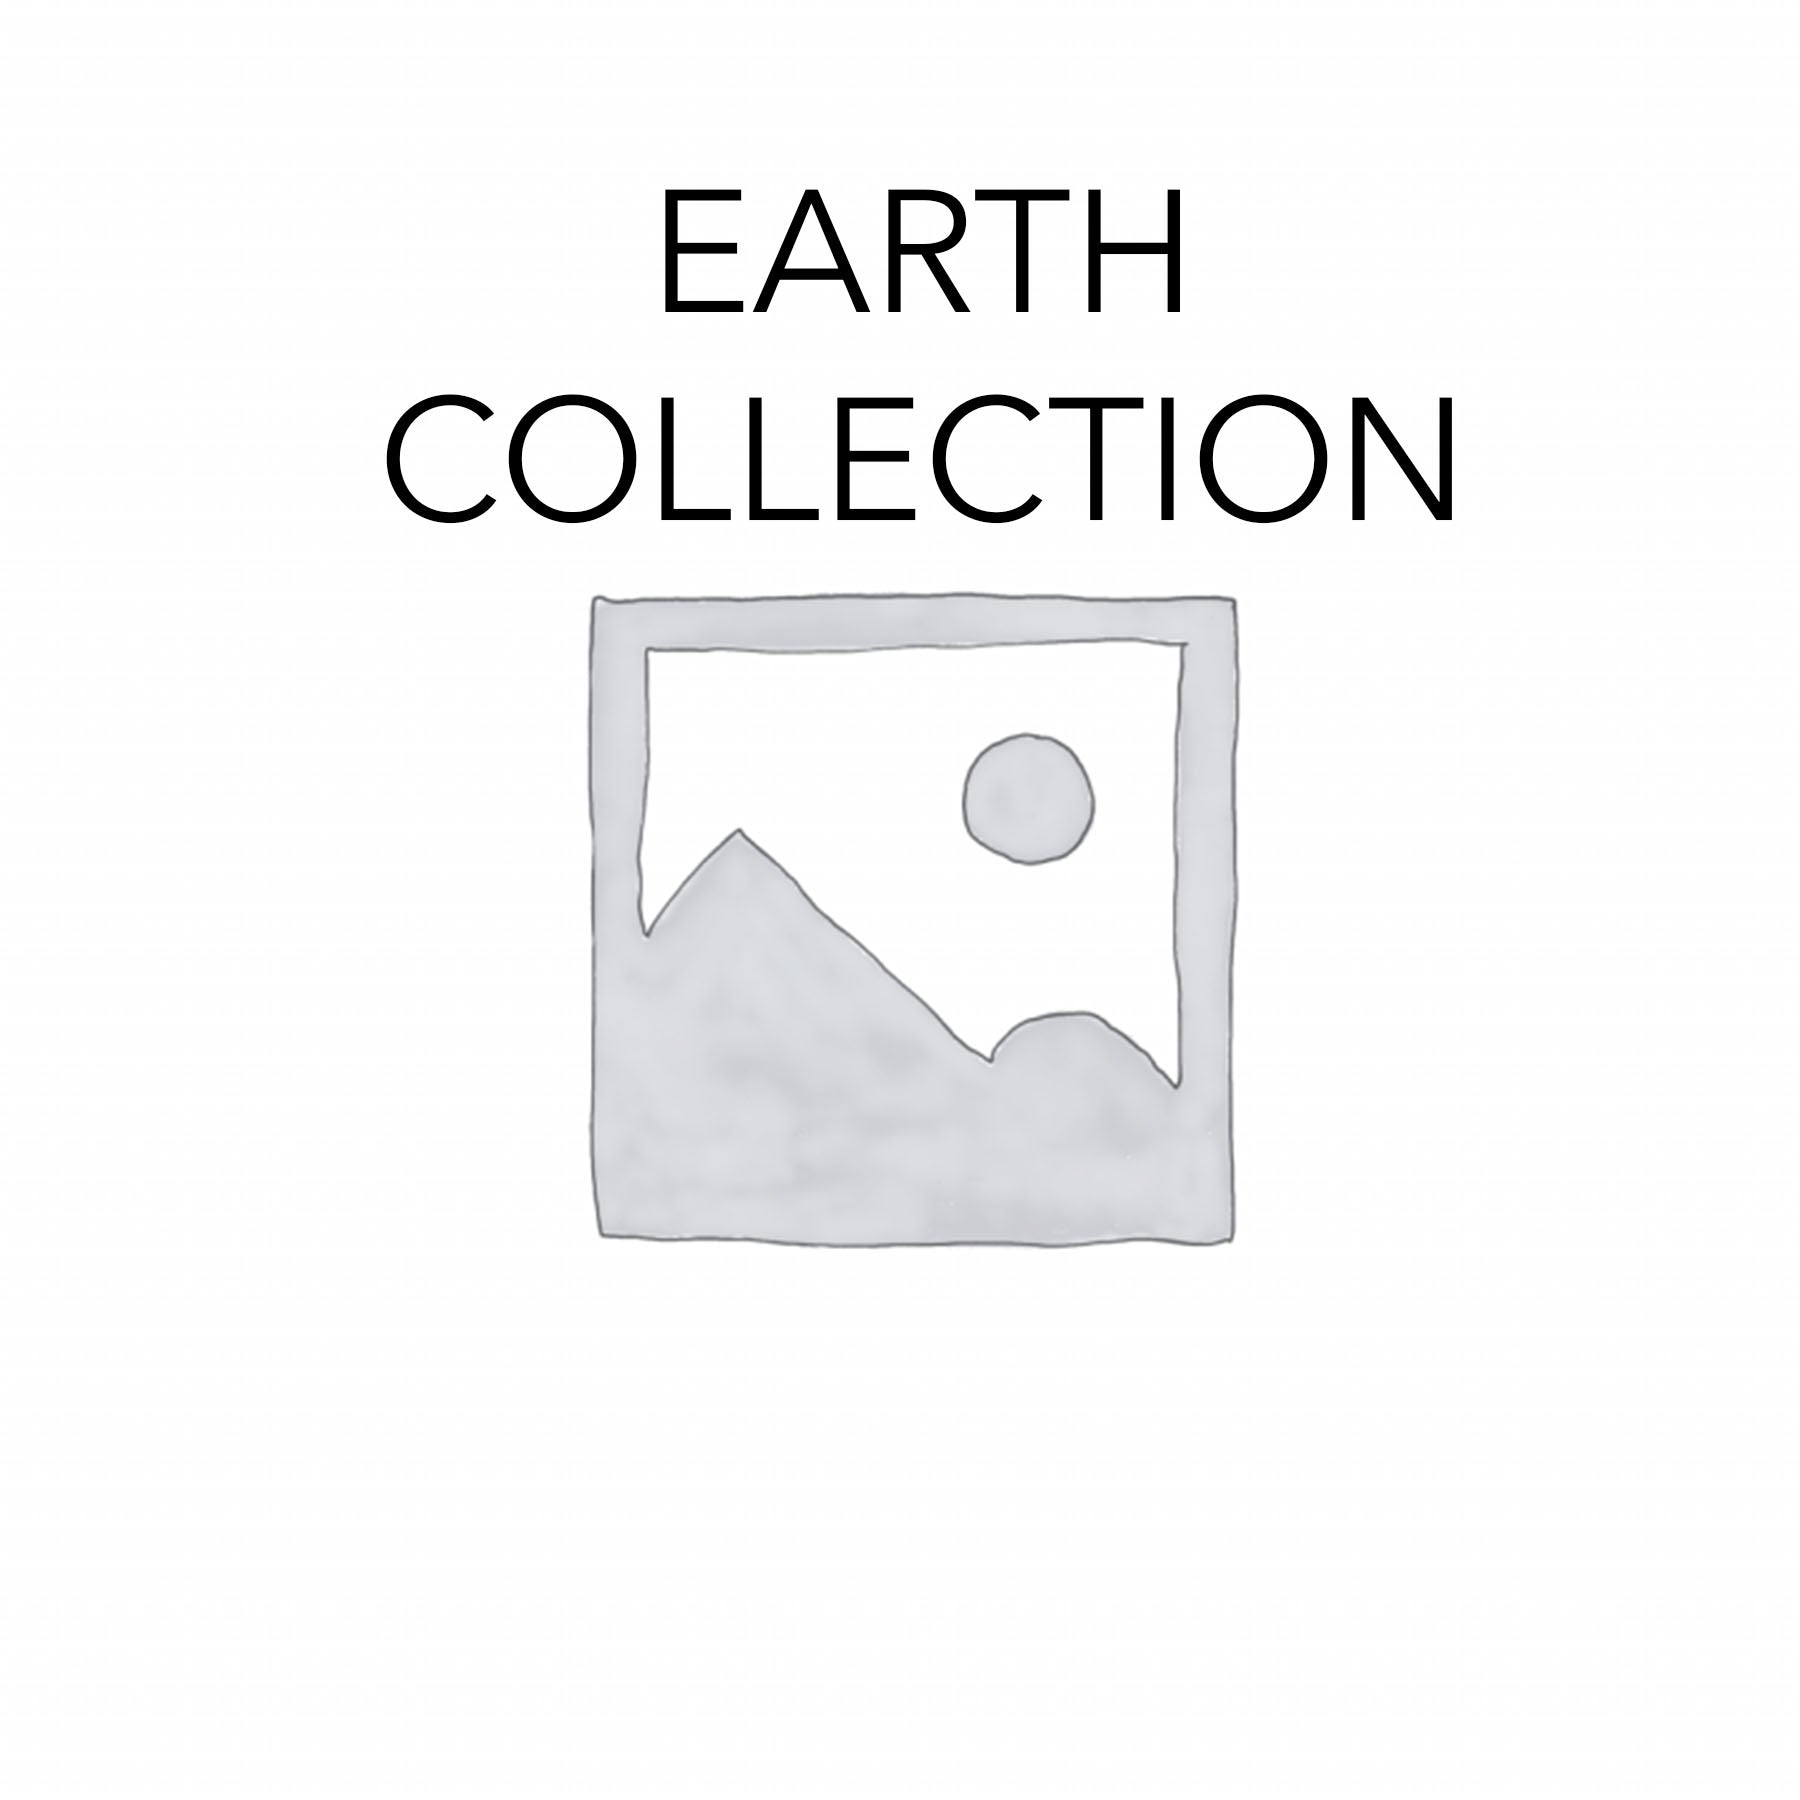 Earth Collection